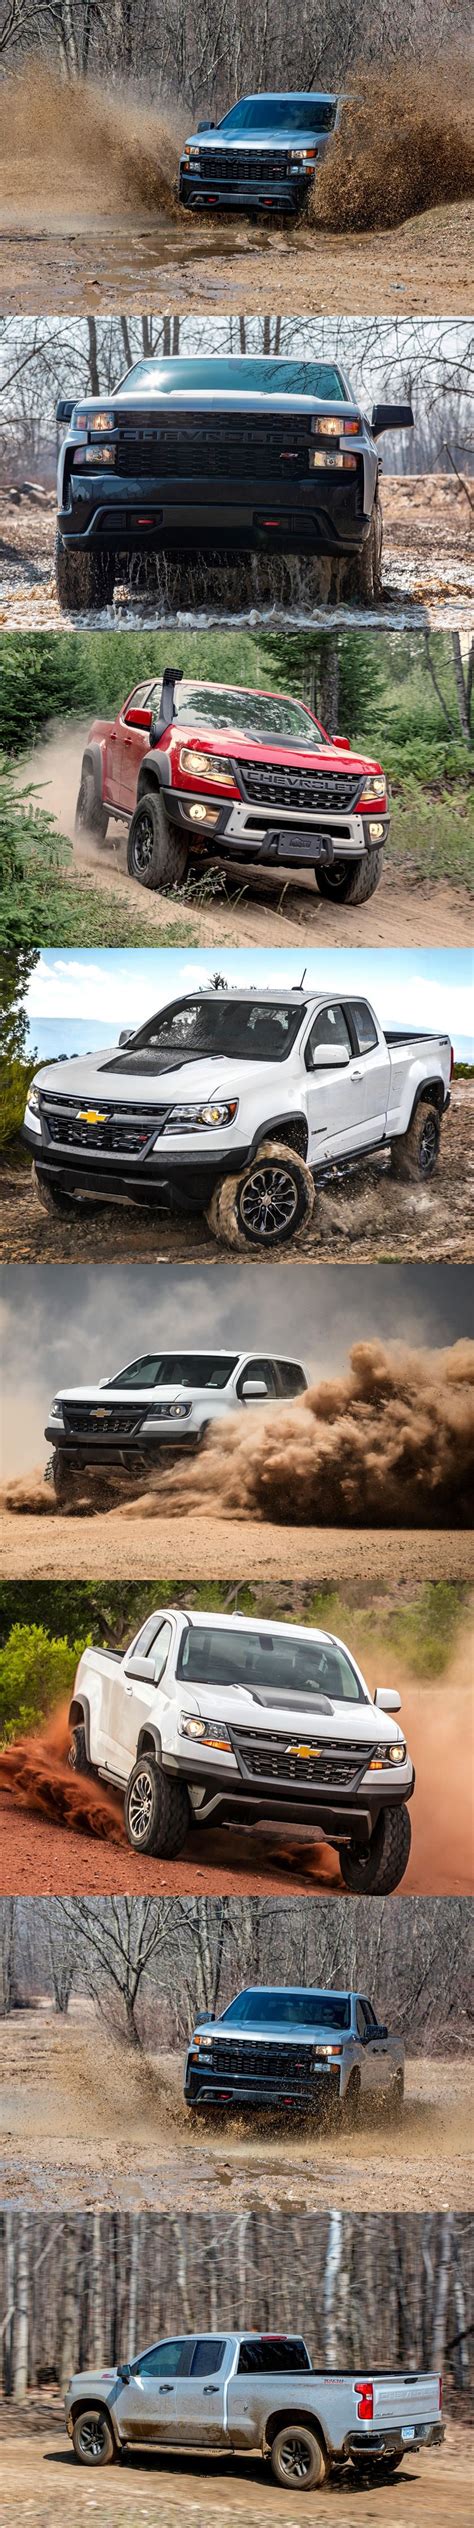 Chevrolet Silverado Zrx Will Be An Off Road Bruiser And Sit At The Top